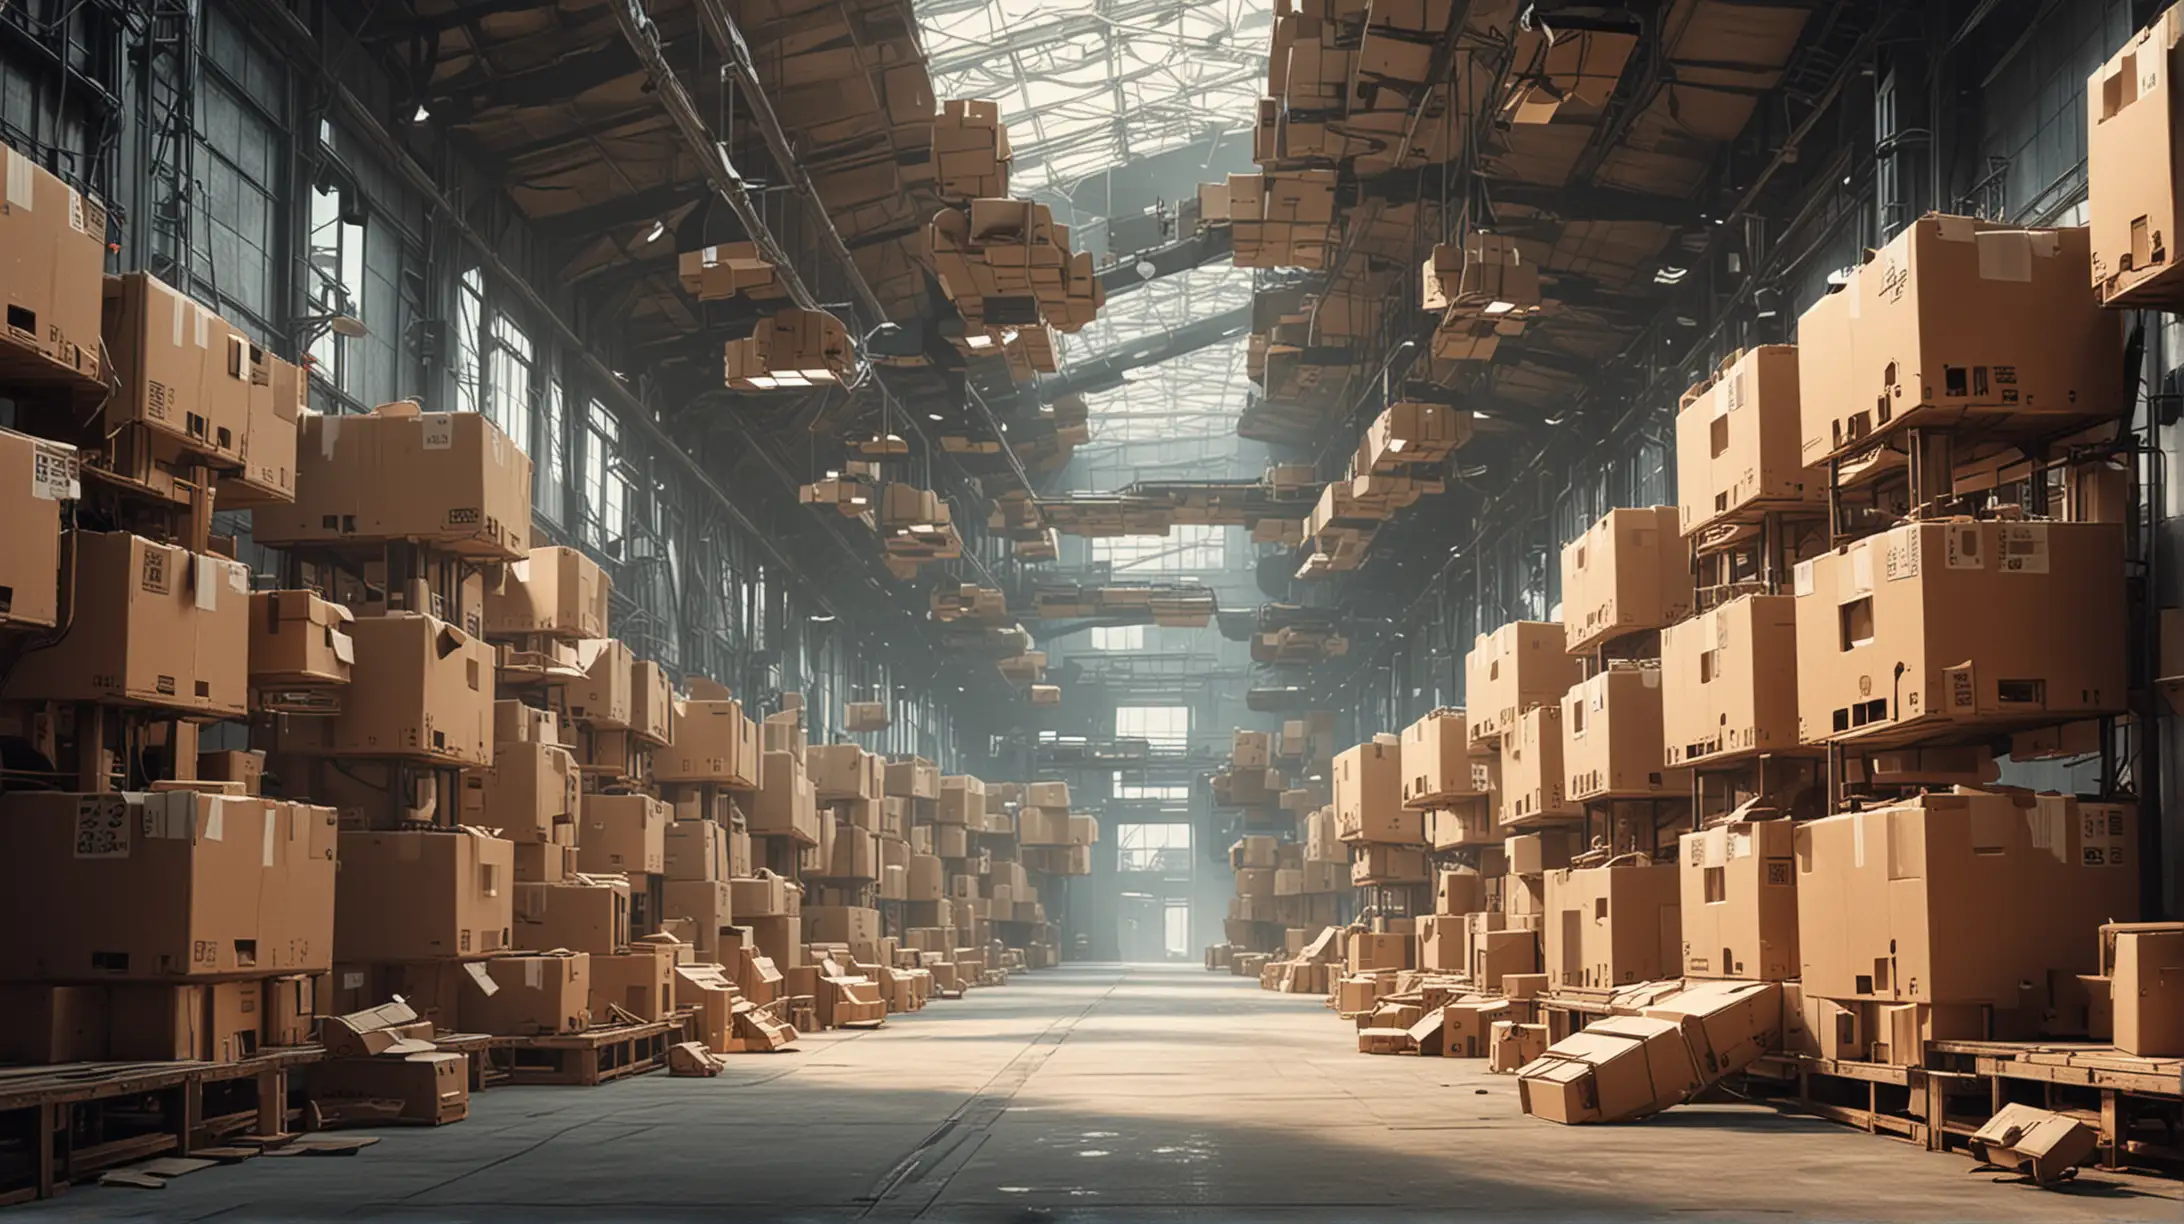 Futuristic Factory with Floating Cardboard Boxes